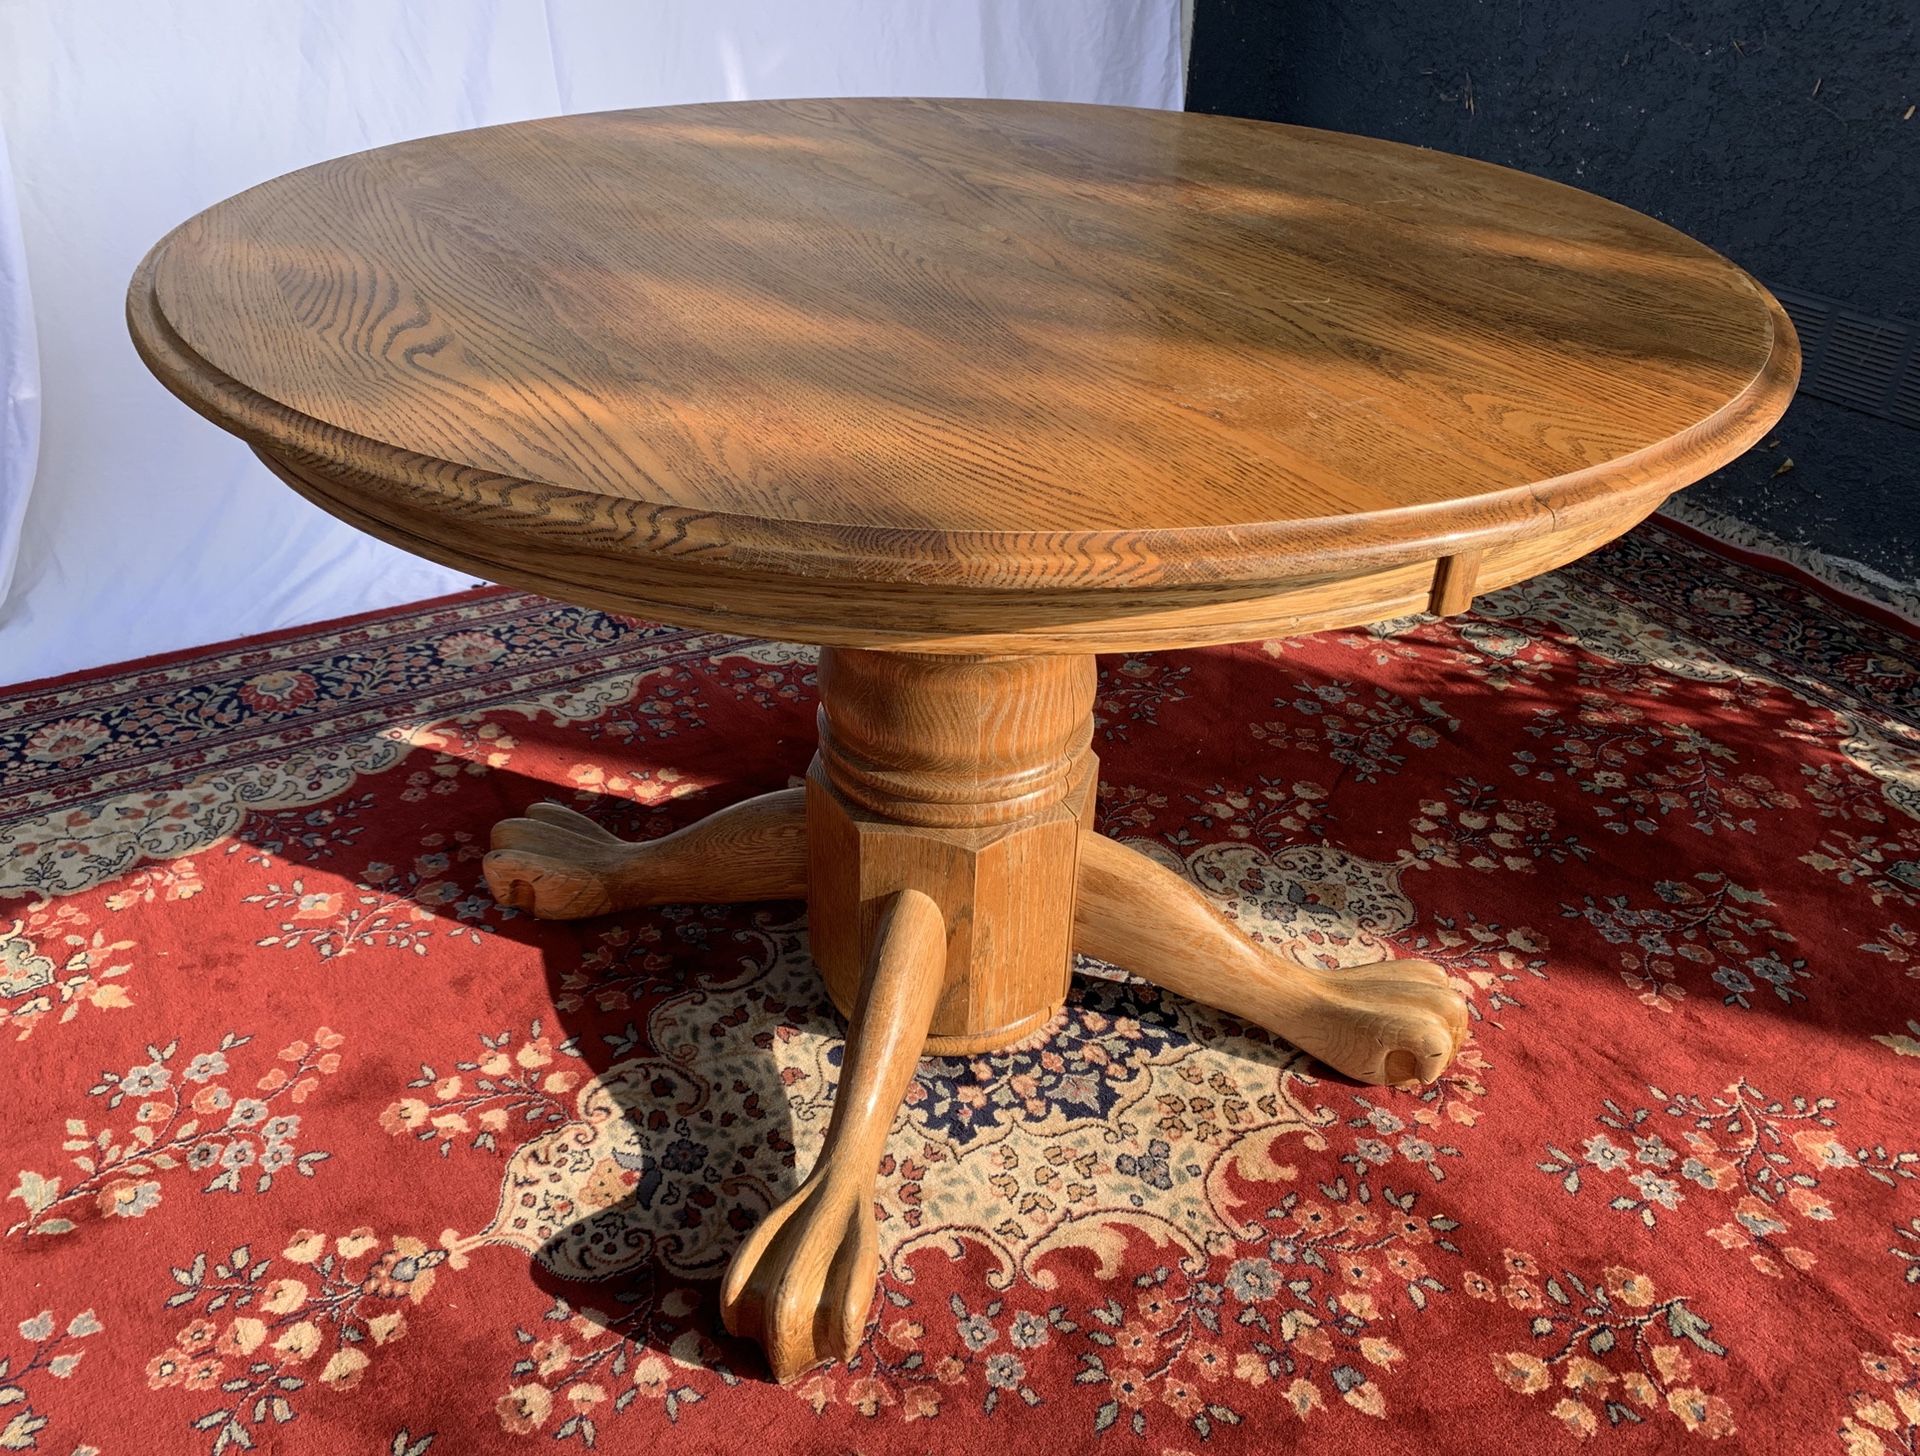 Round solid oak “claw foot” kitchen table with removable leaf